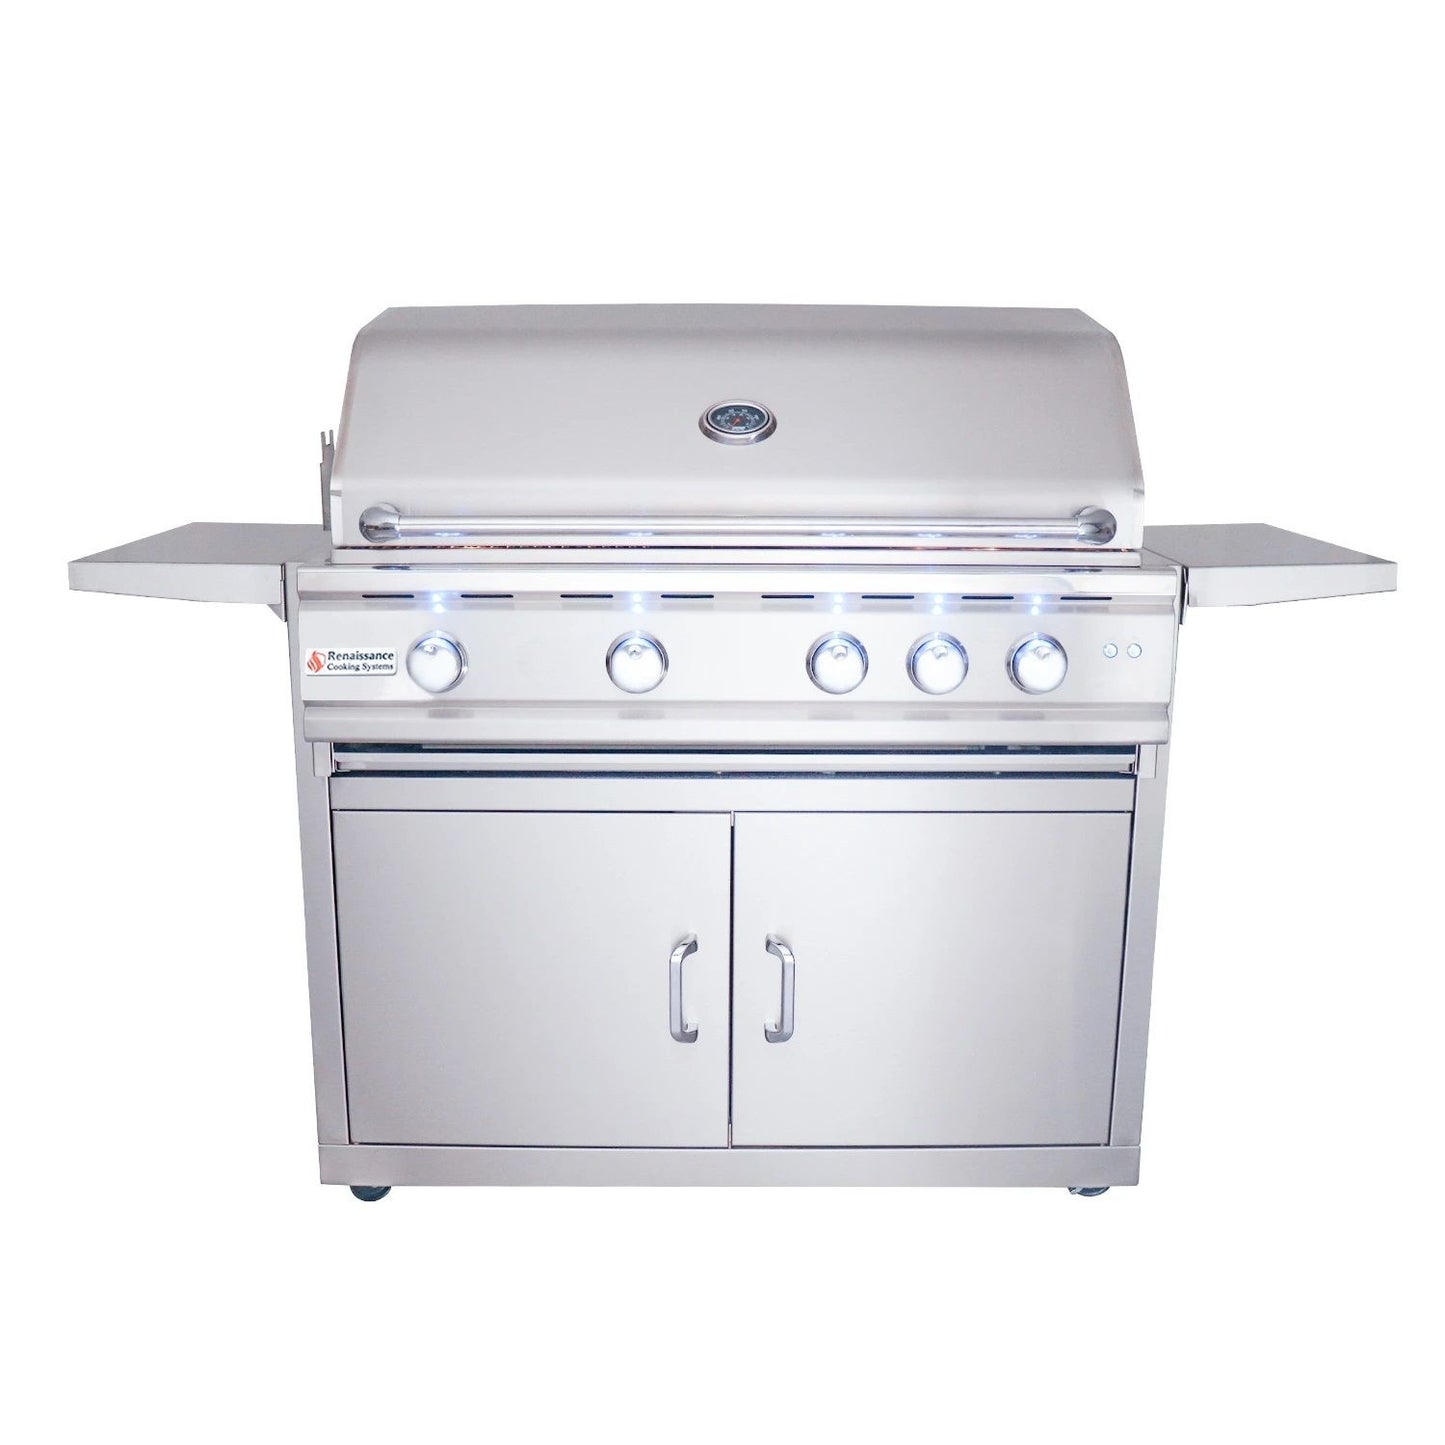 RCS Cutlass Pro 38-Inch Natural Gas Grill - RON38ACK